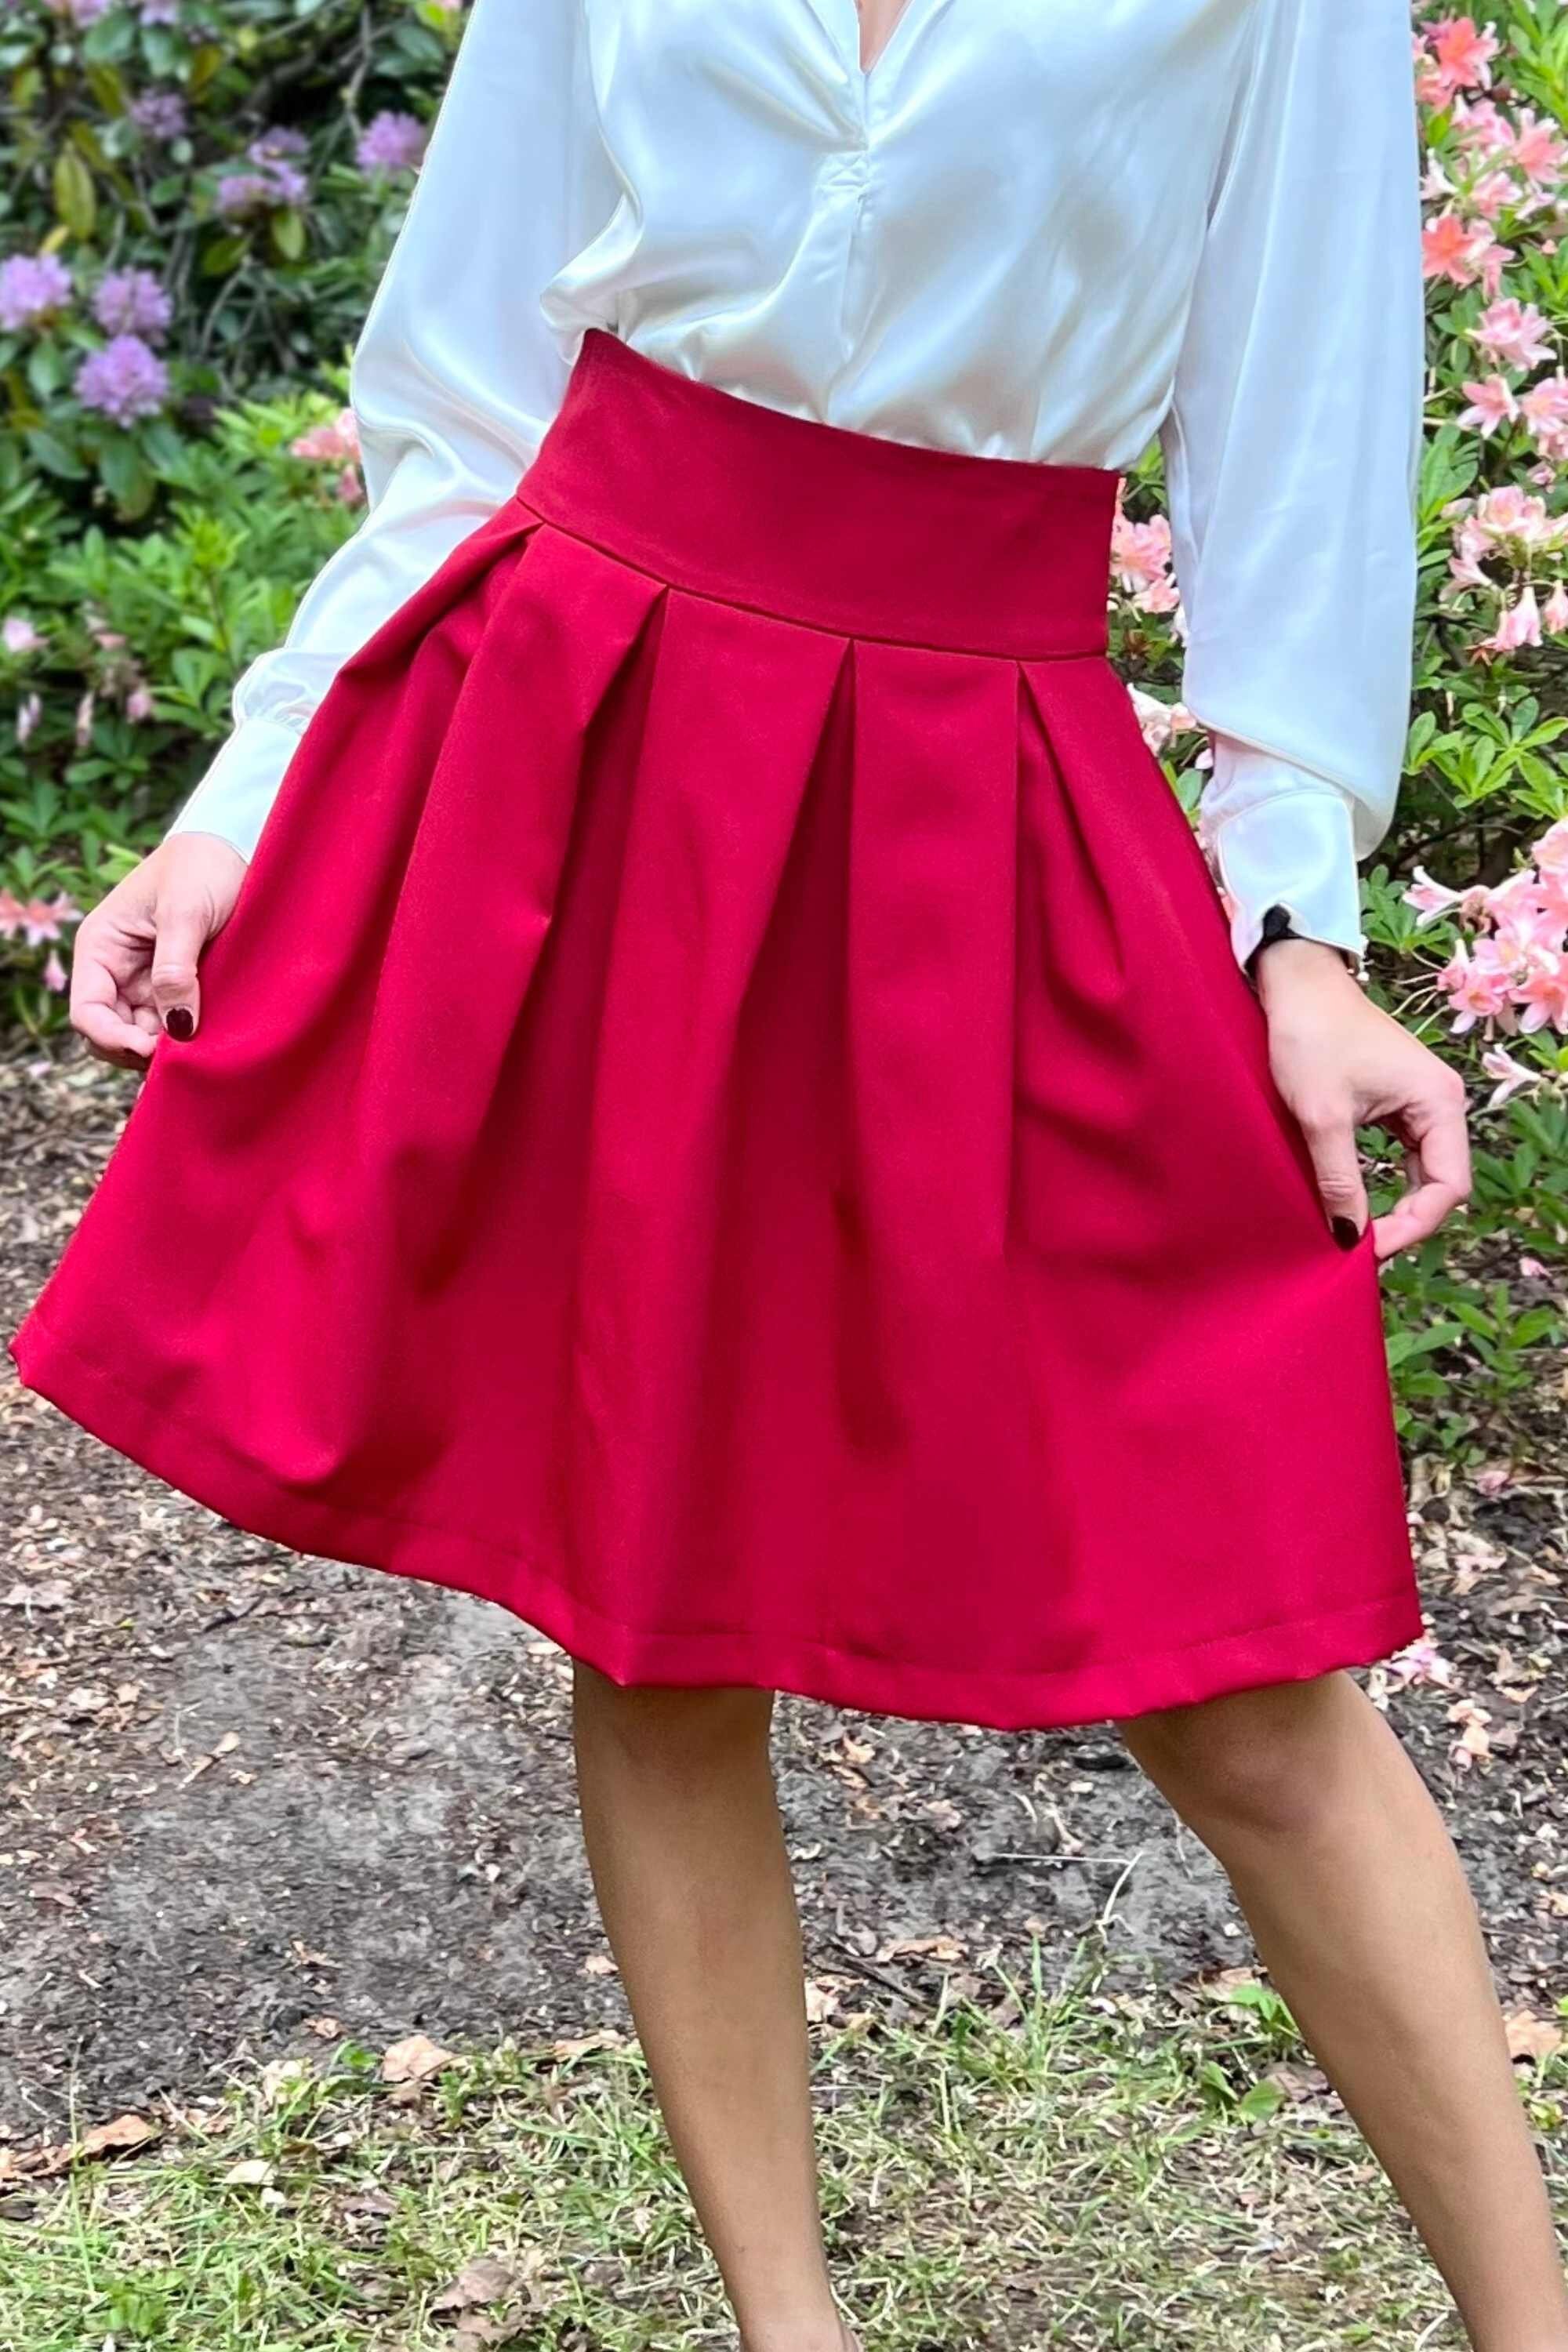 Flared Pleated Mini Skirt With Pockets Stylish Flared Mini Skirt Short Skirt  Circle Skirt Cocktail Skirt Fashion Skirt Wine Color 